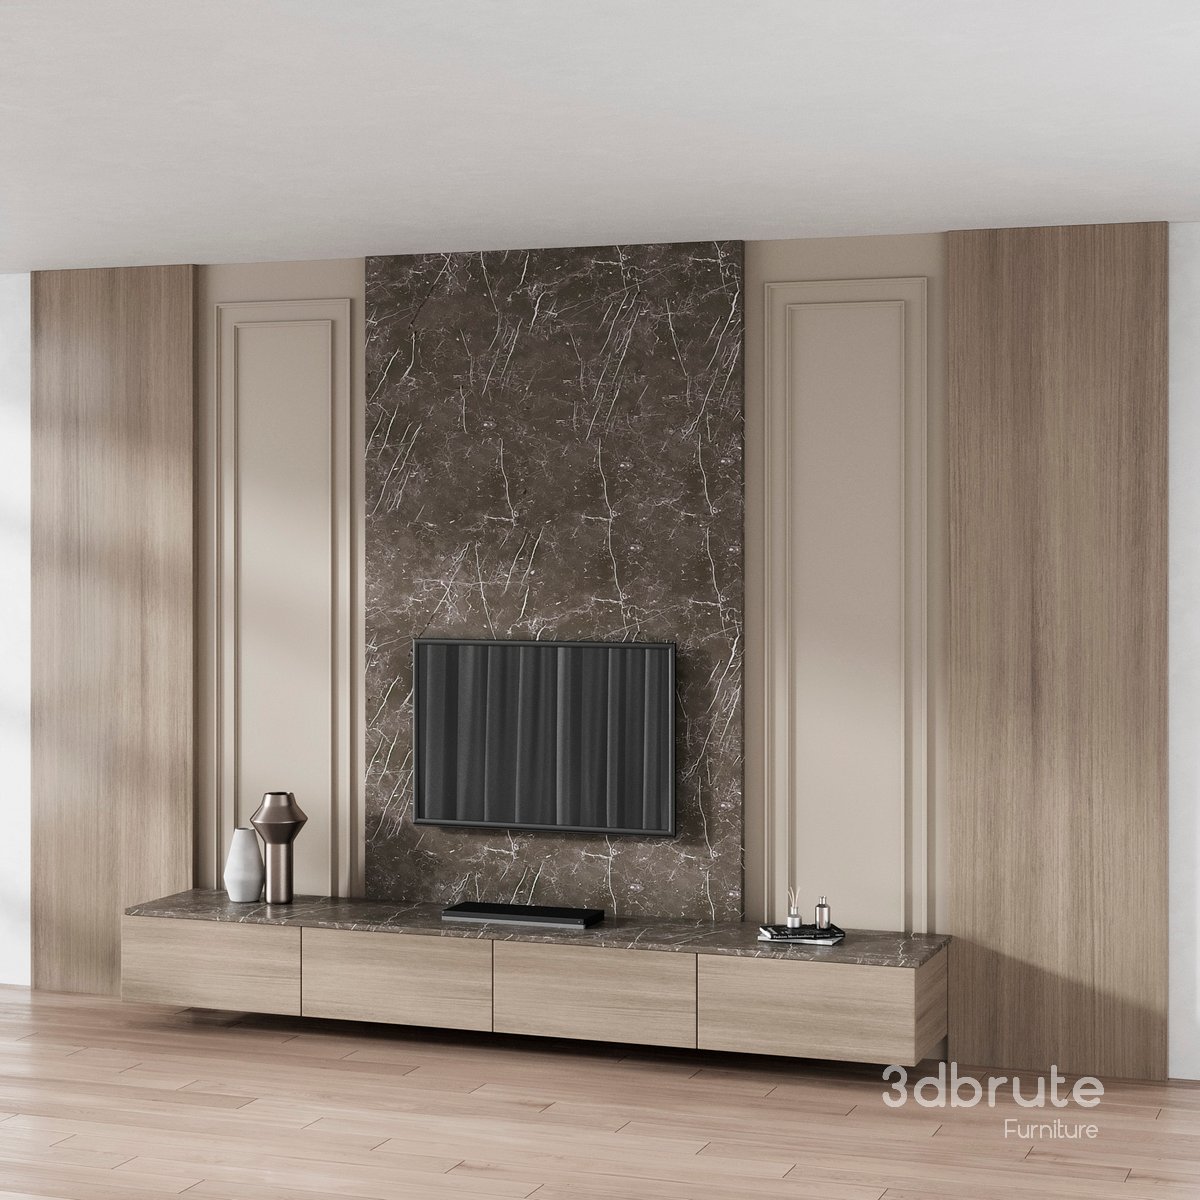 TV Wall Stone and Wood 3d model Buy Download 3dbrute